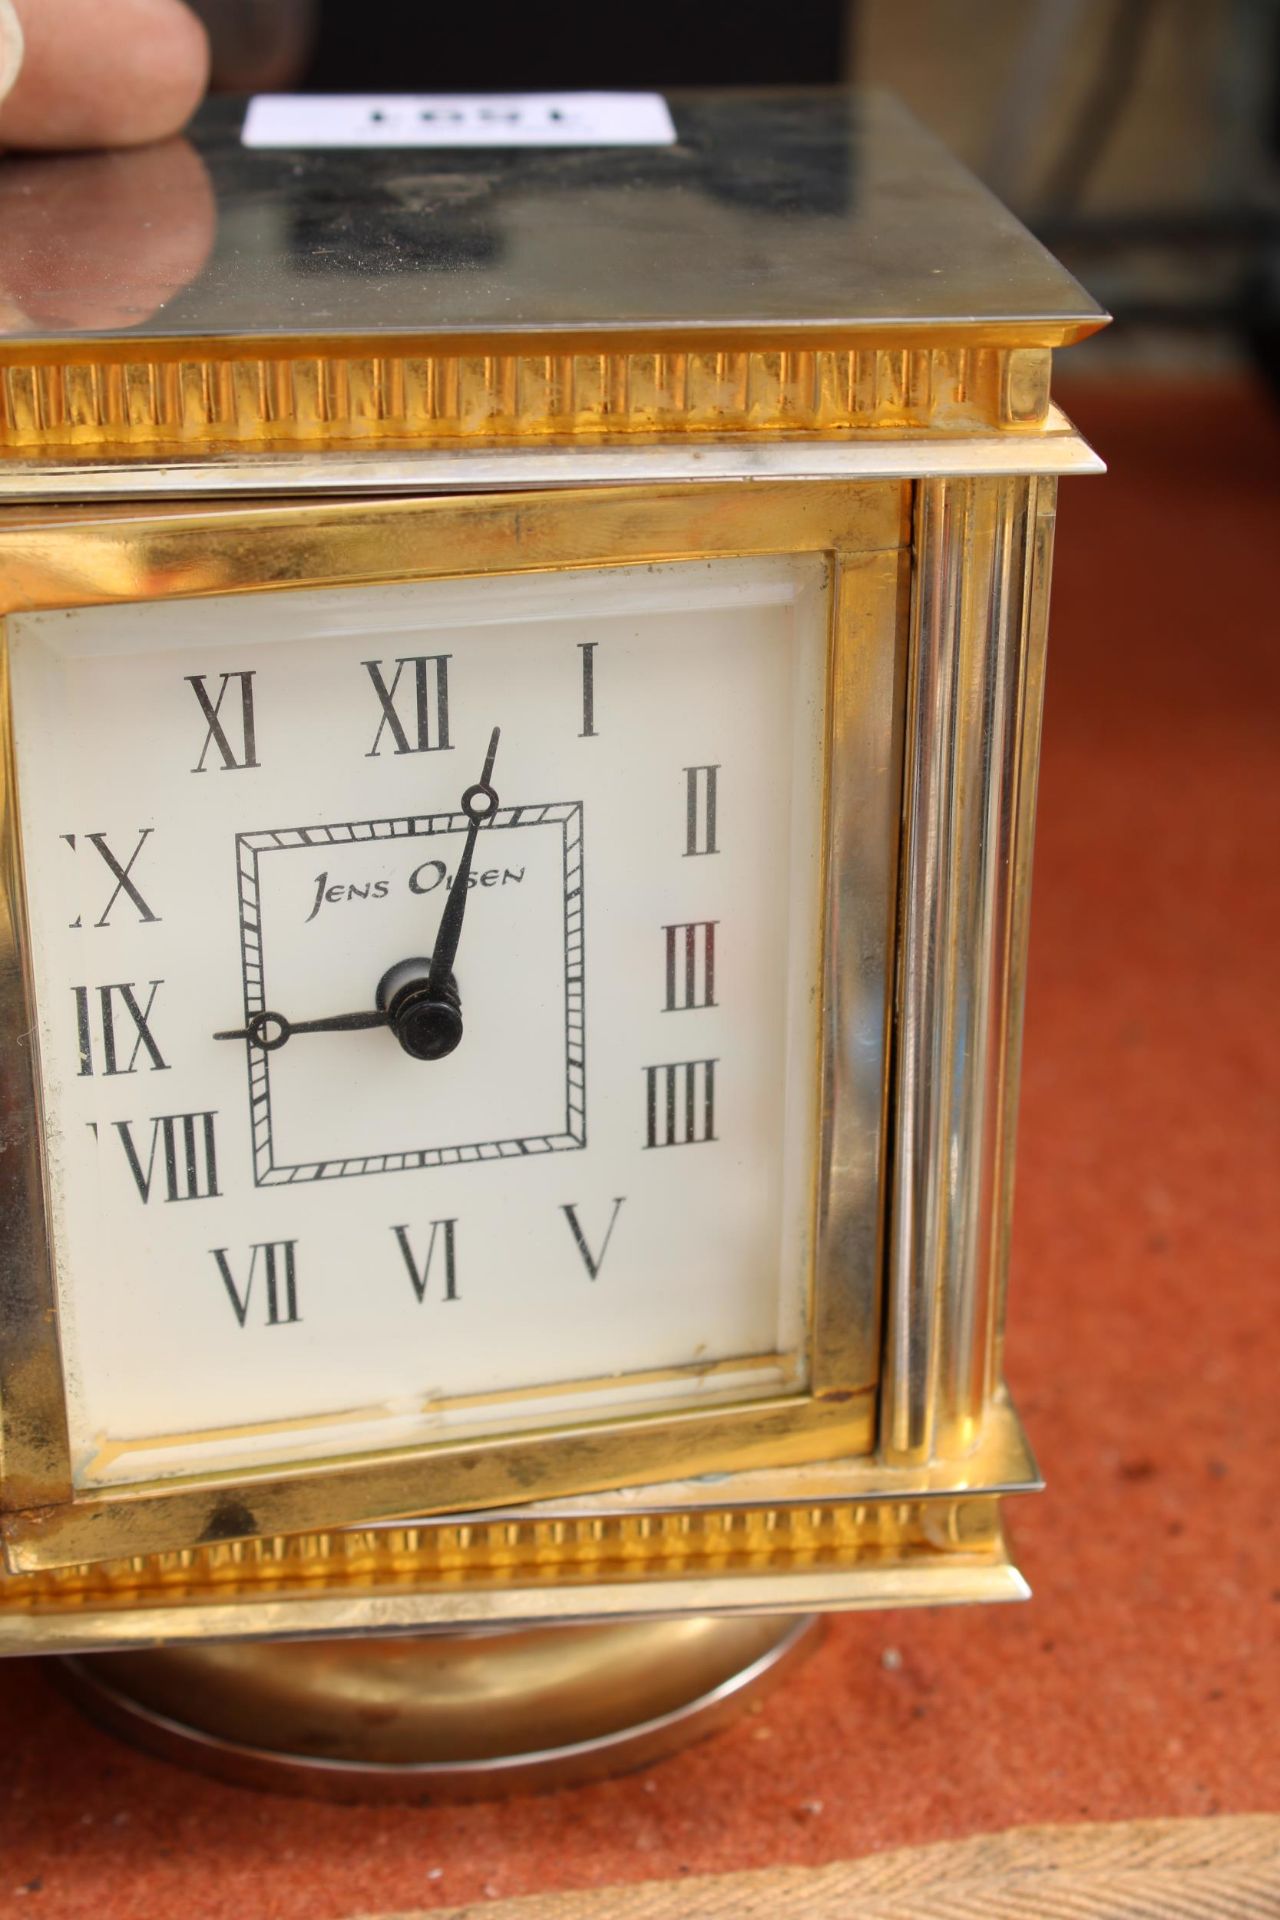 A BRASS JENS OLSEN REVOLVING DESK CLOCK WITH FOUR FACES, TWO BEING CLOCKS, ONE THERMOMETER AND ONE - Image 5 of 6